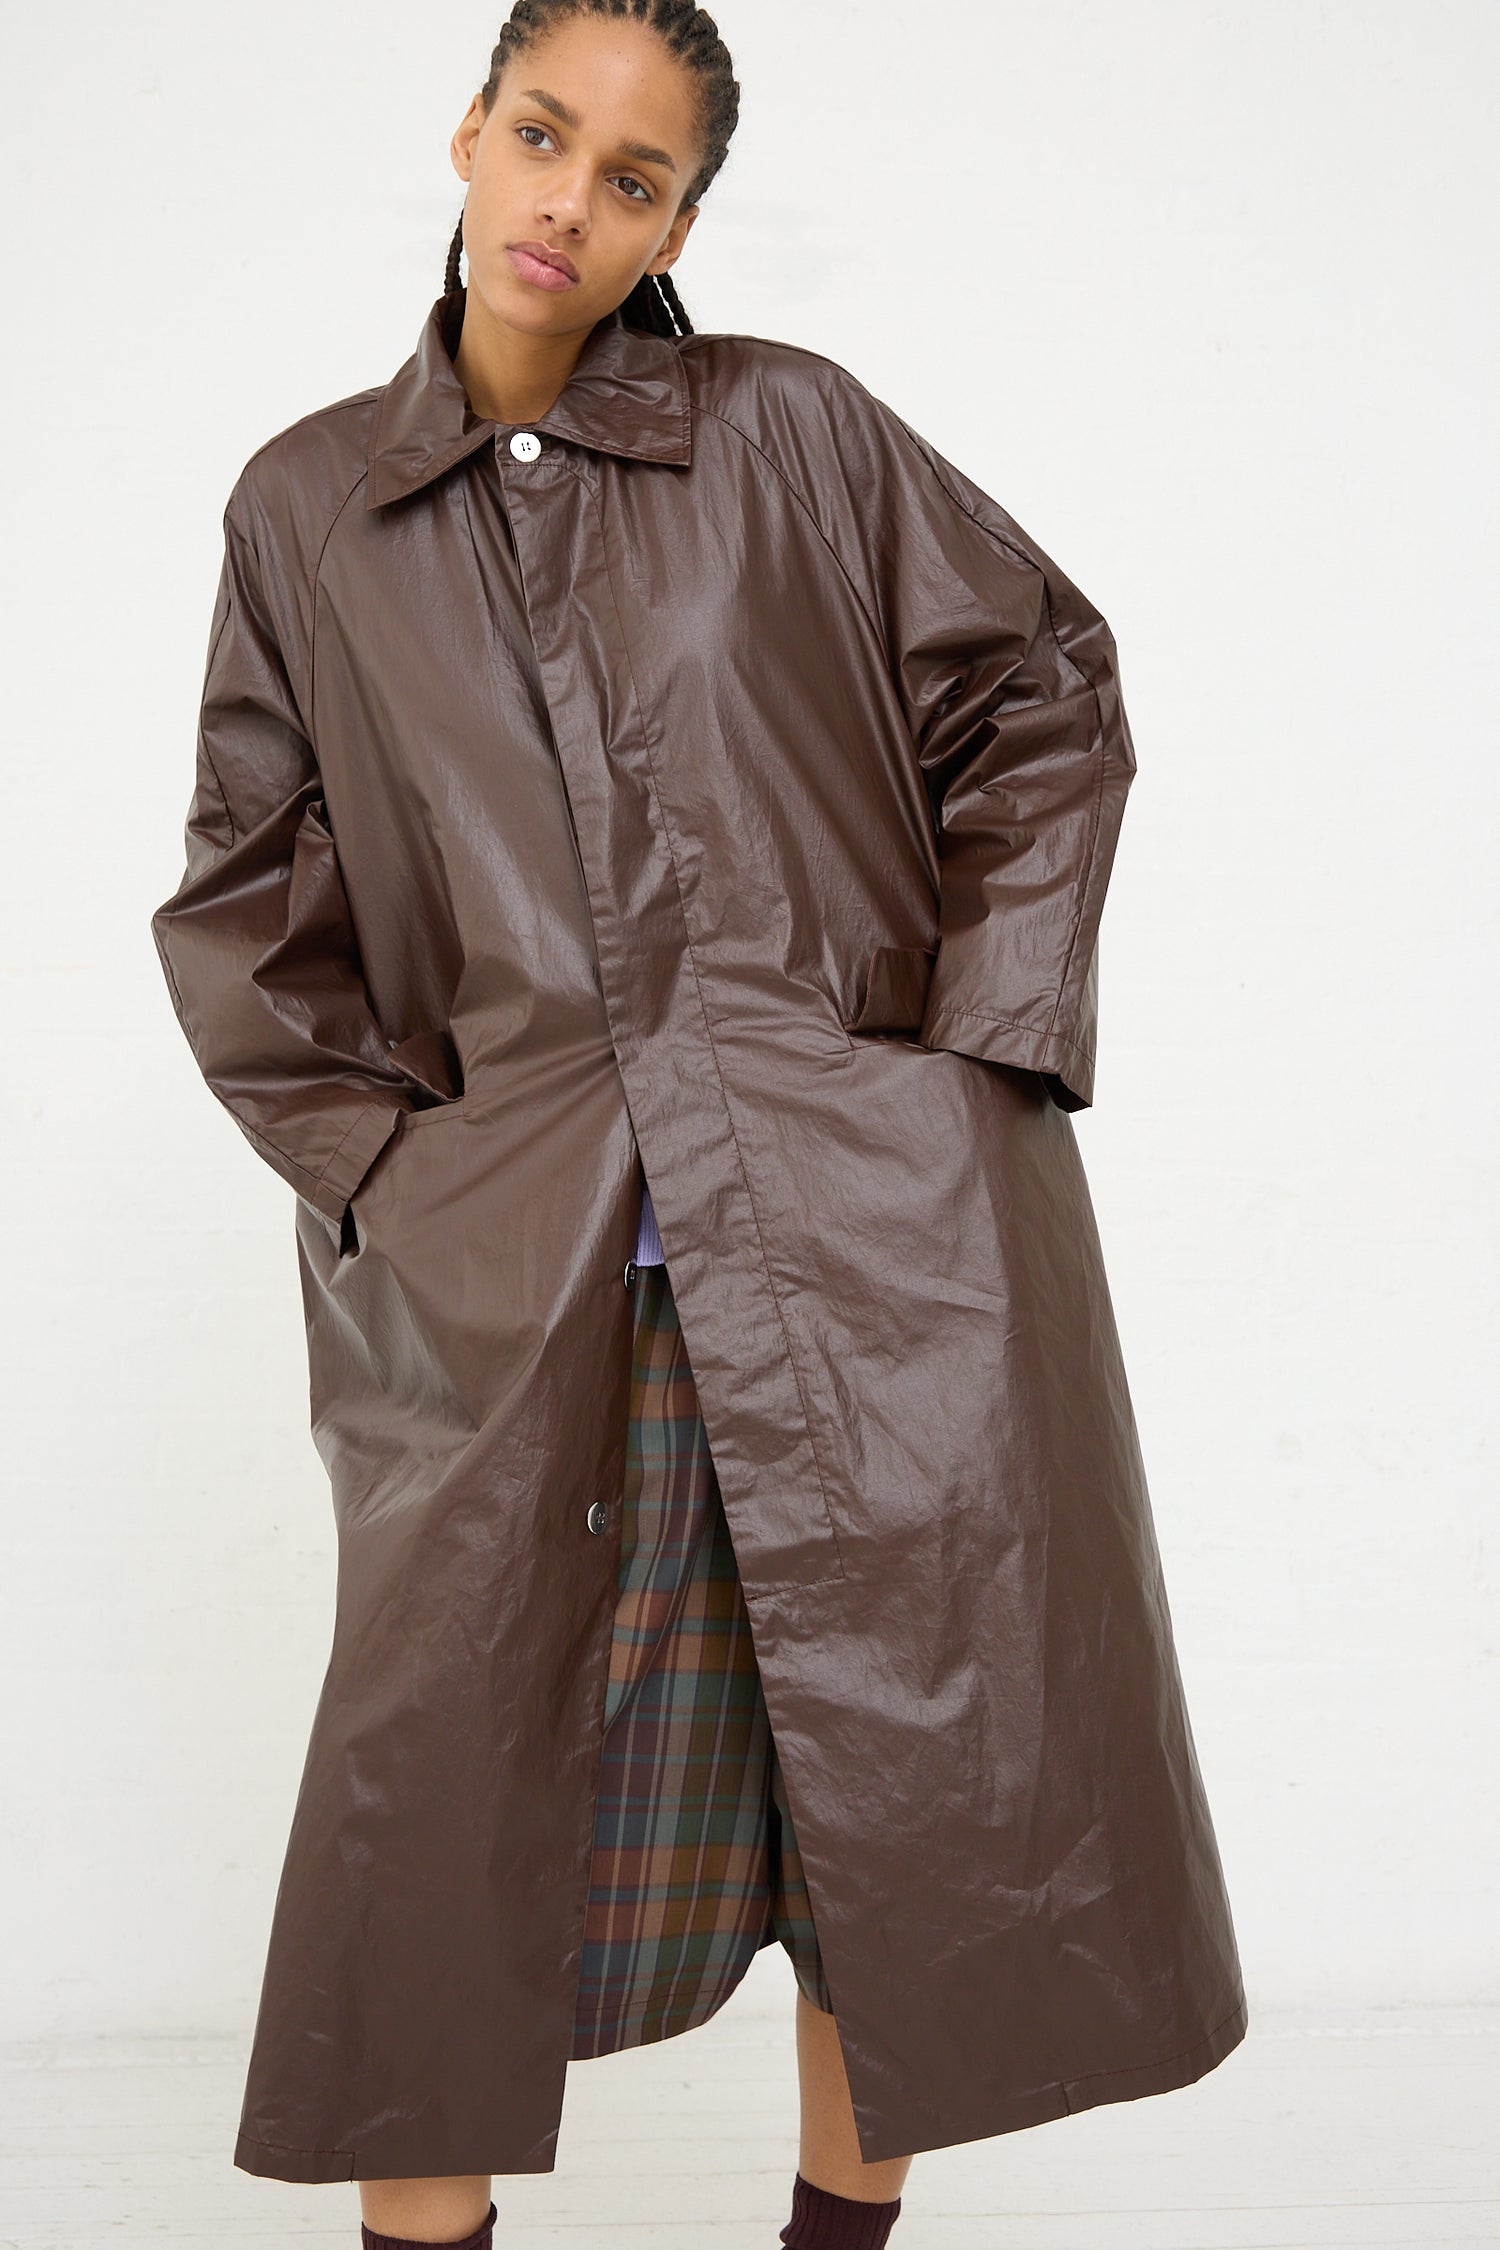 A woman modeling a water-repellent, long brown Cordera trench coat in Prune with a plaid skirt visible underneath.